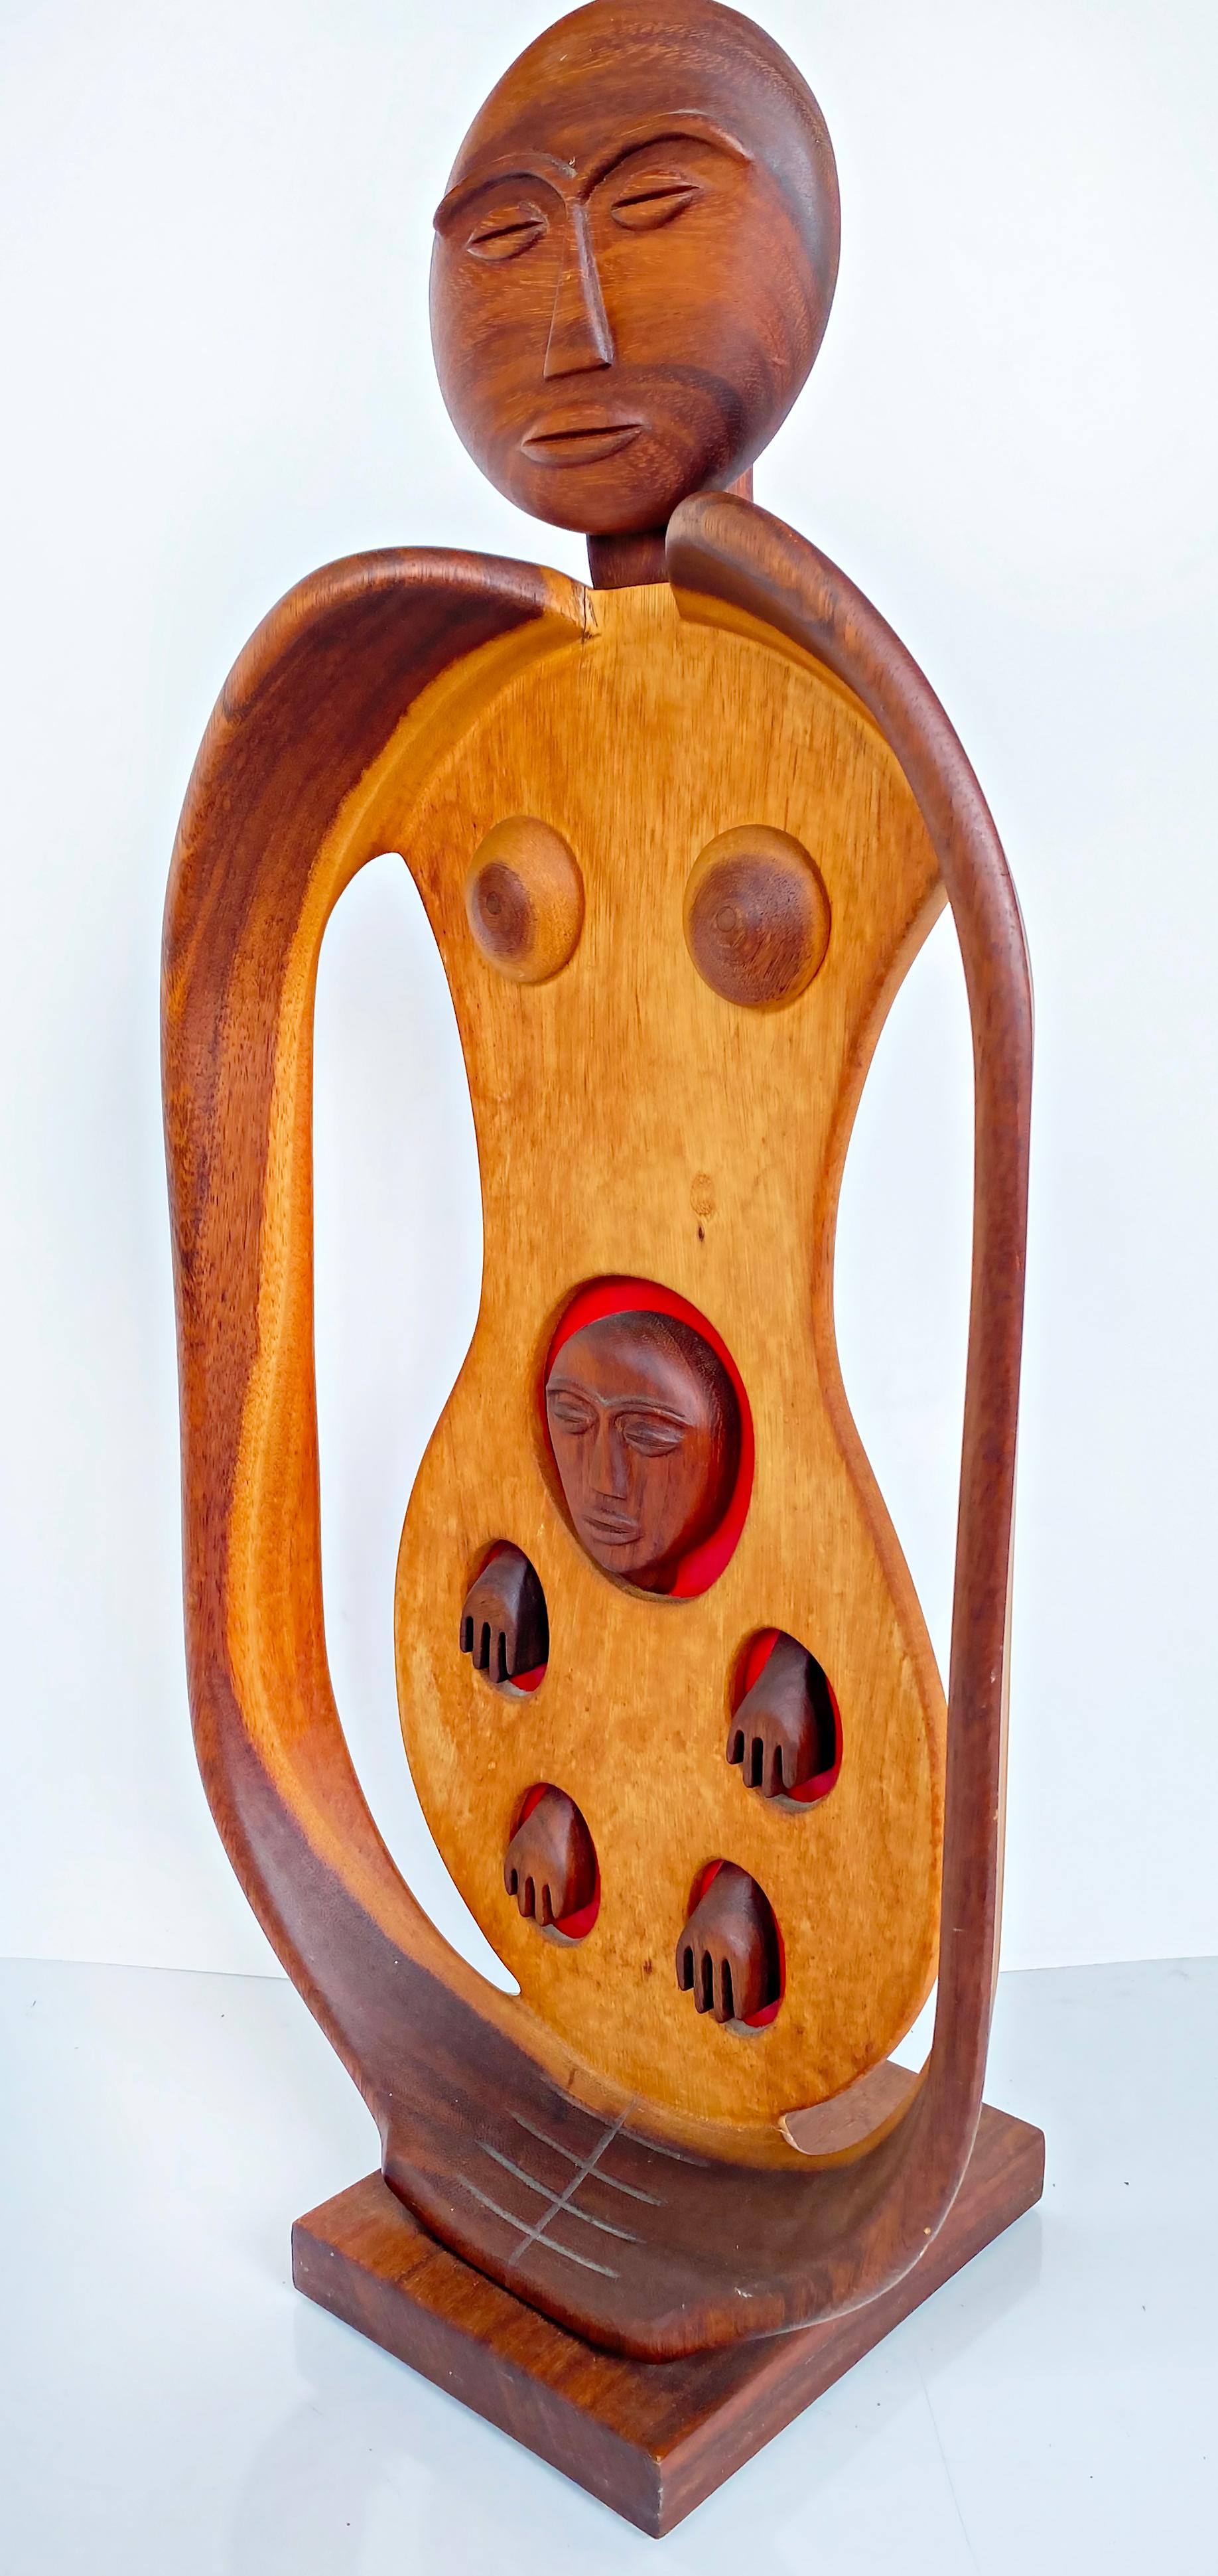 1970s Edwin Scheier Carved sculpture Symbolizing Fertility

Offered for sale is a rare, untitled sculpture of Guanacaste wood and paint by the listed American artist Edwin Scheier (1910-2008). Edwin Scheier was best known for his ceramic works